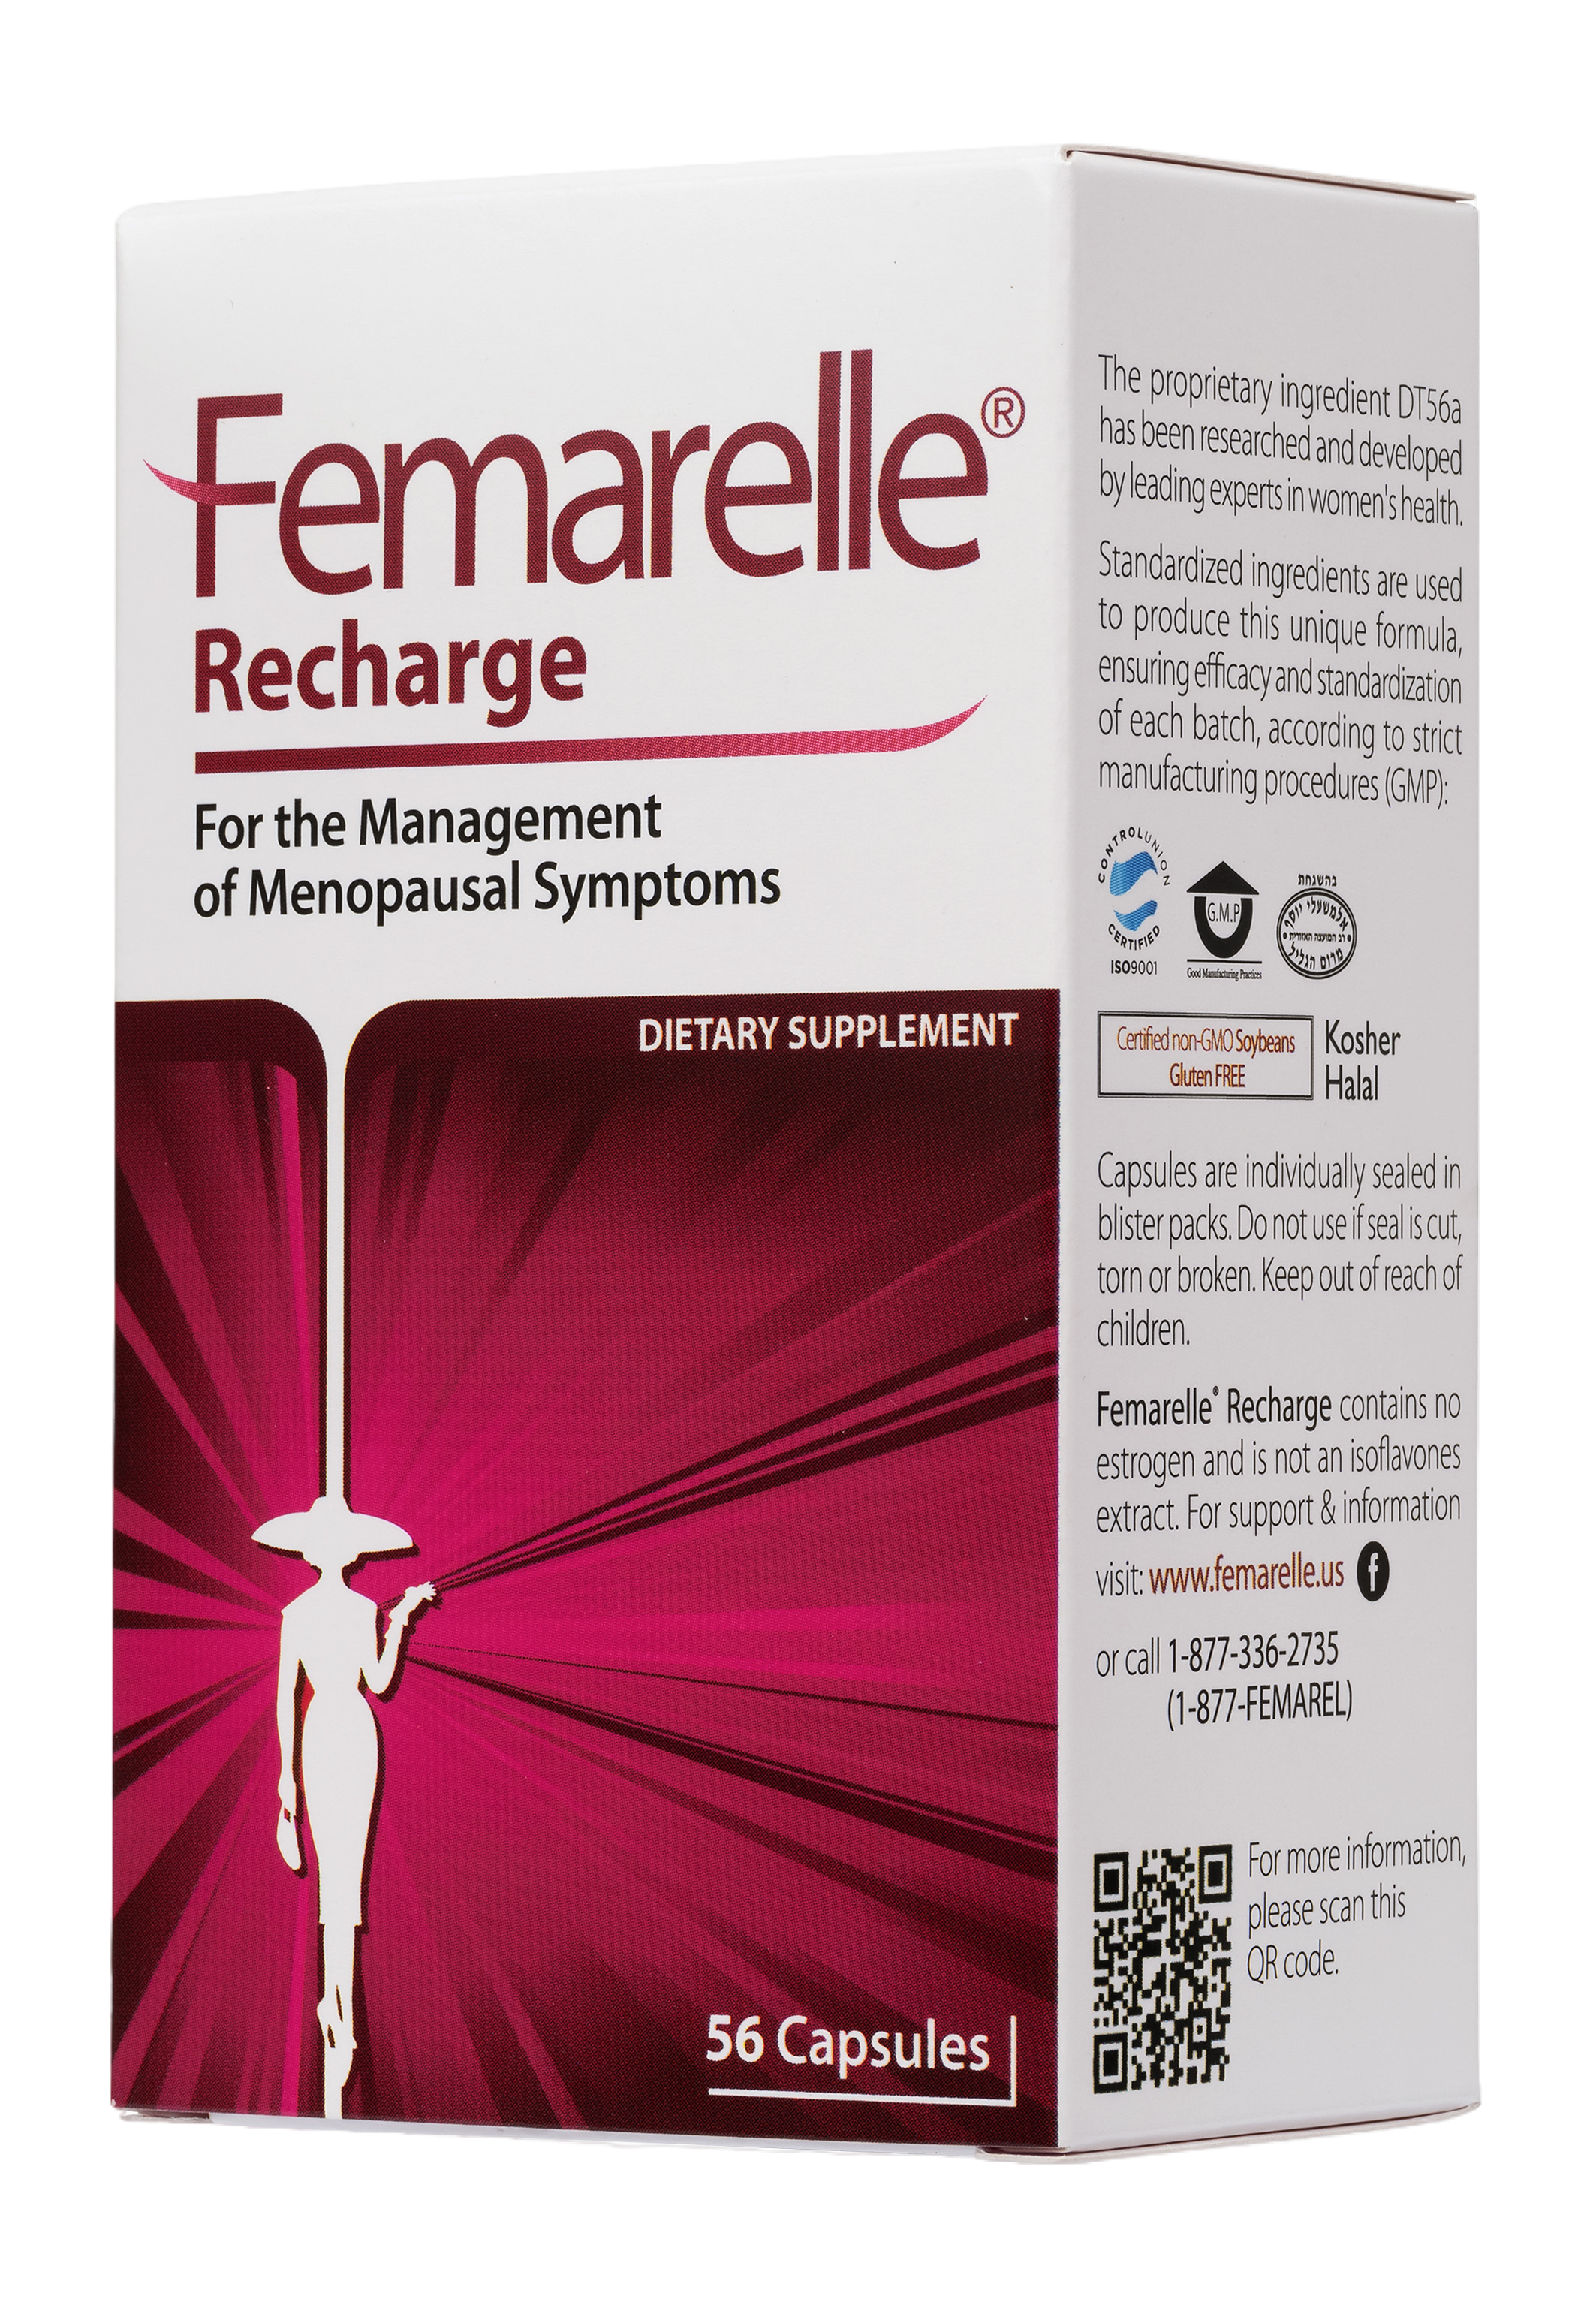 Femarelle Recharge, a natural menopause relief supplement